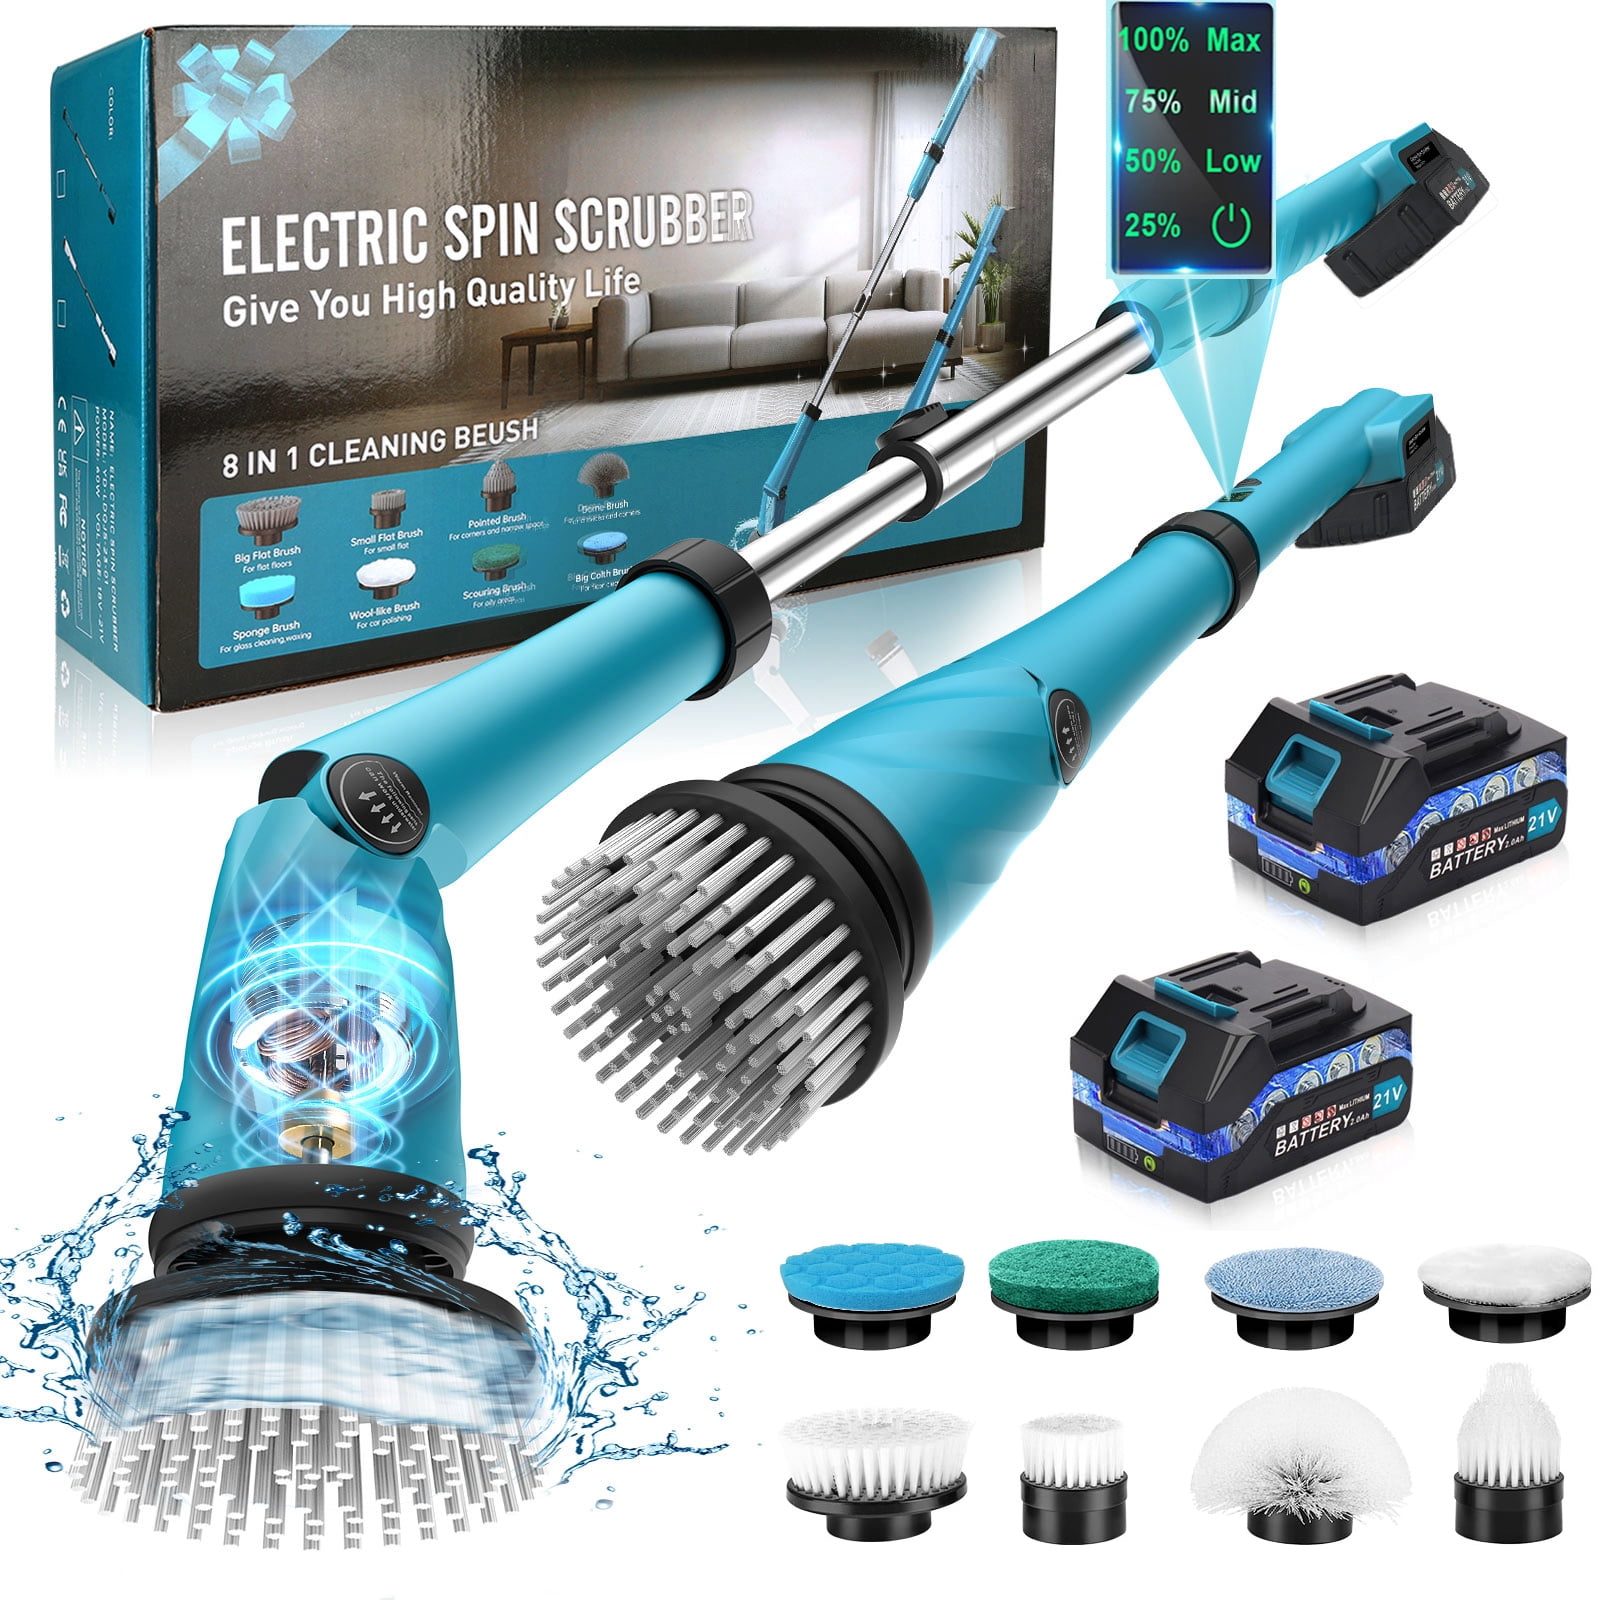 8 In 1 Electric Cleaning Brush Spin Scrubber Rechargeable Kitchen